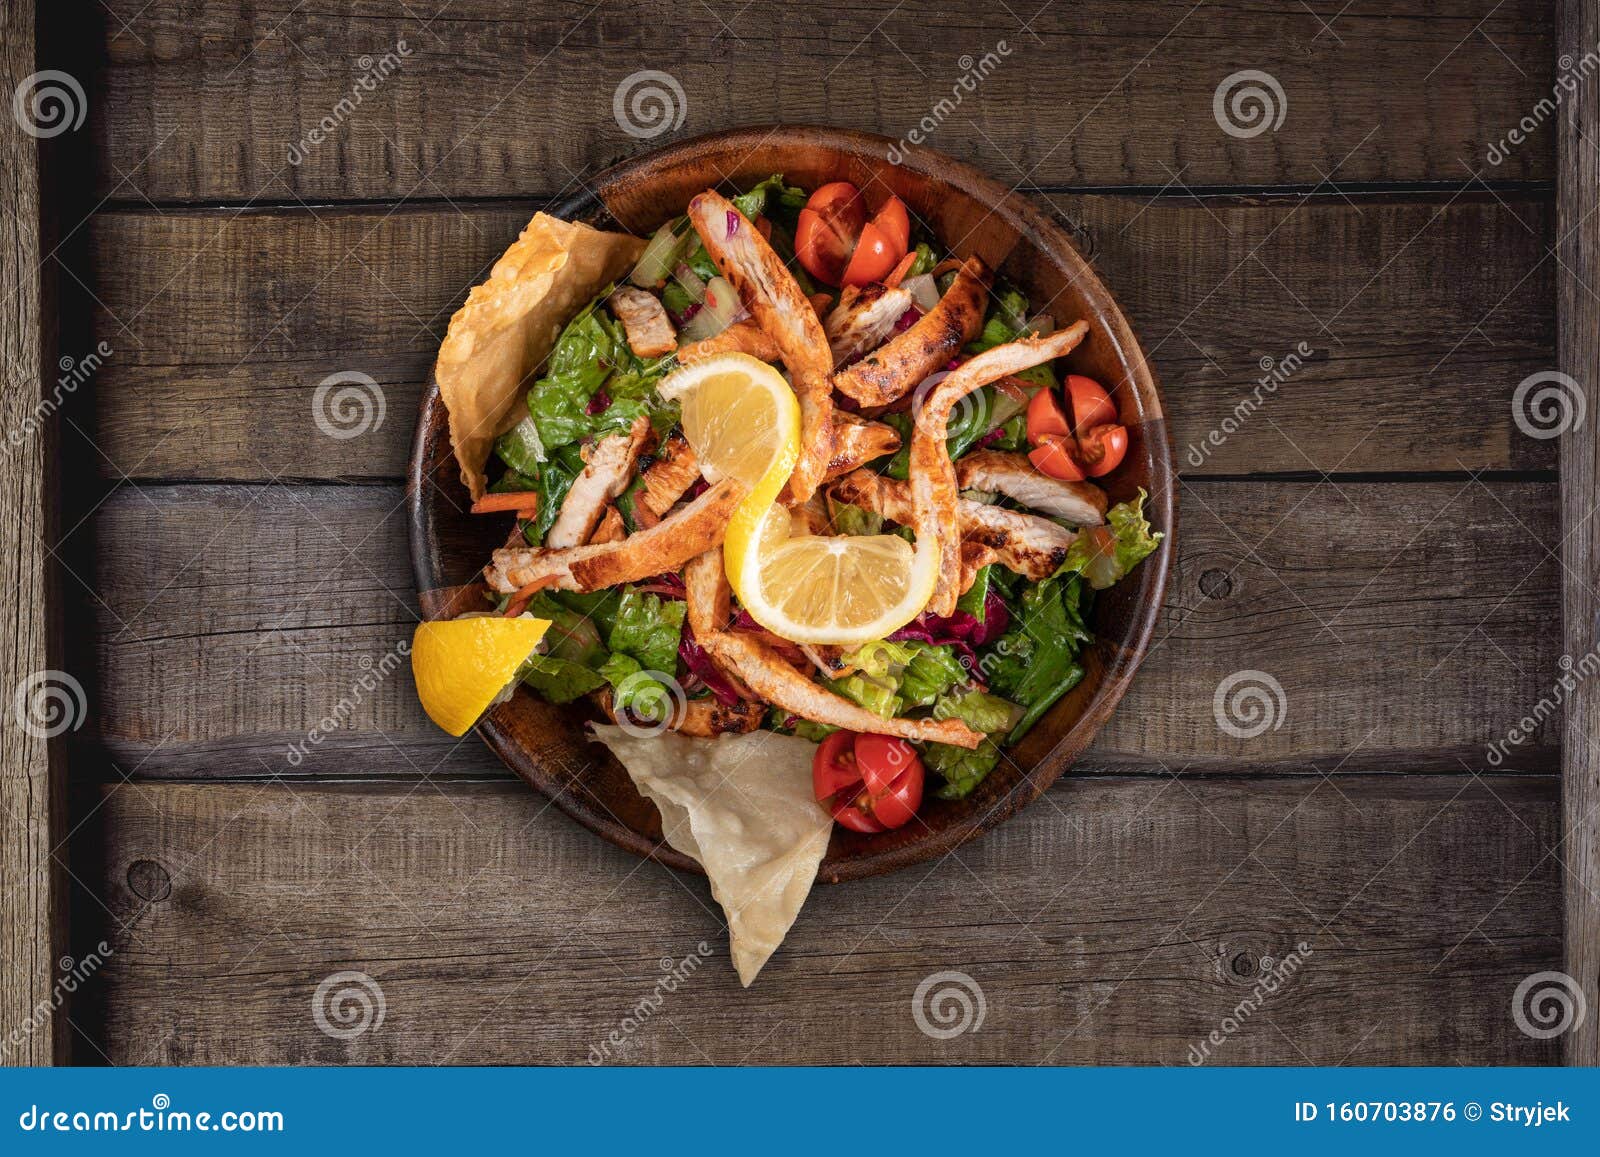 healthy chicken salad with red cabagge and tomato on rustic wooden kitchen table